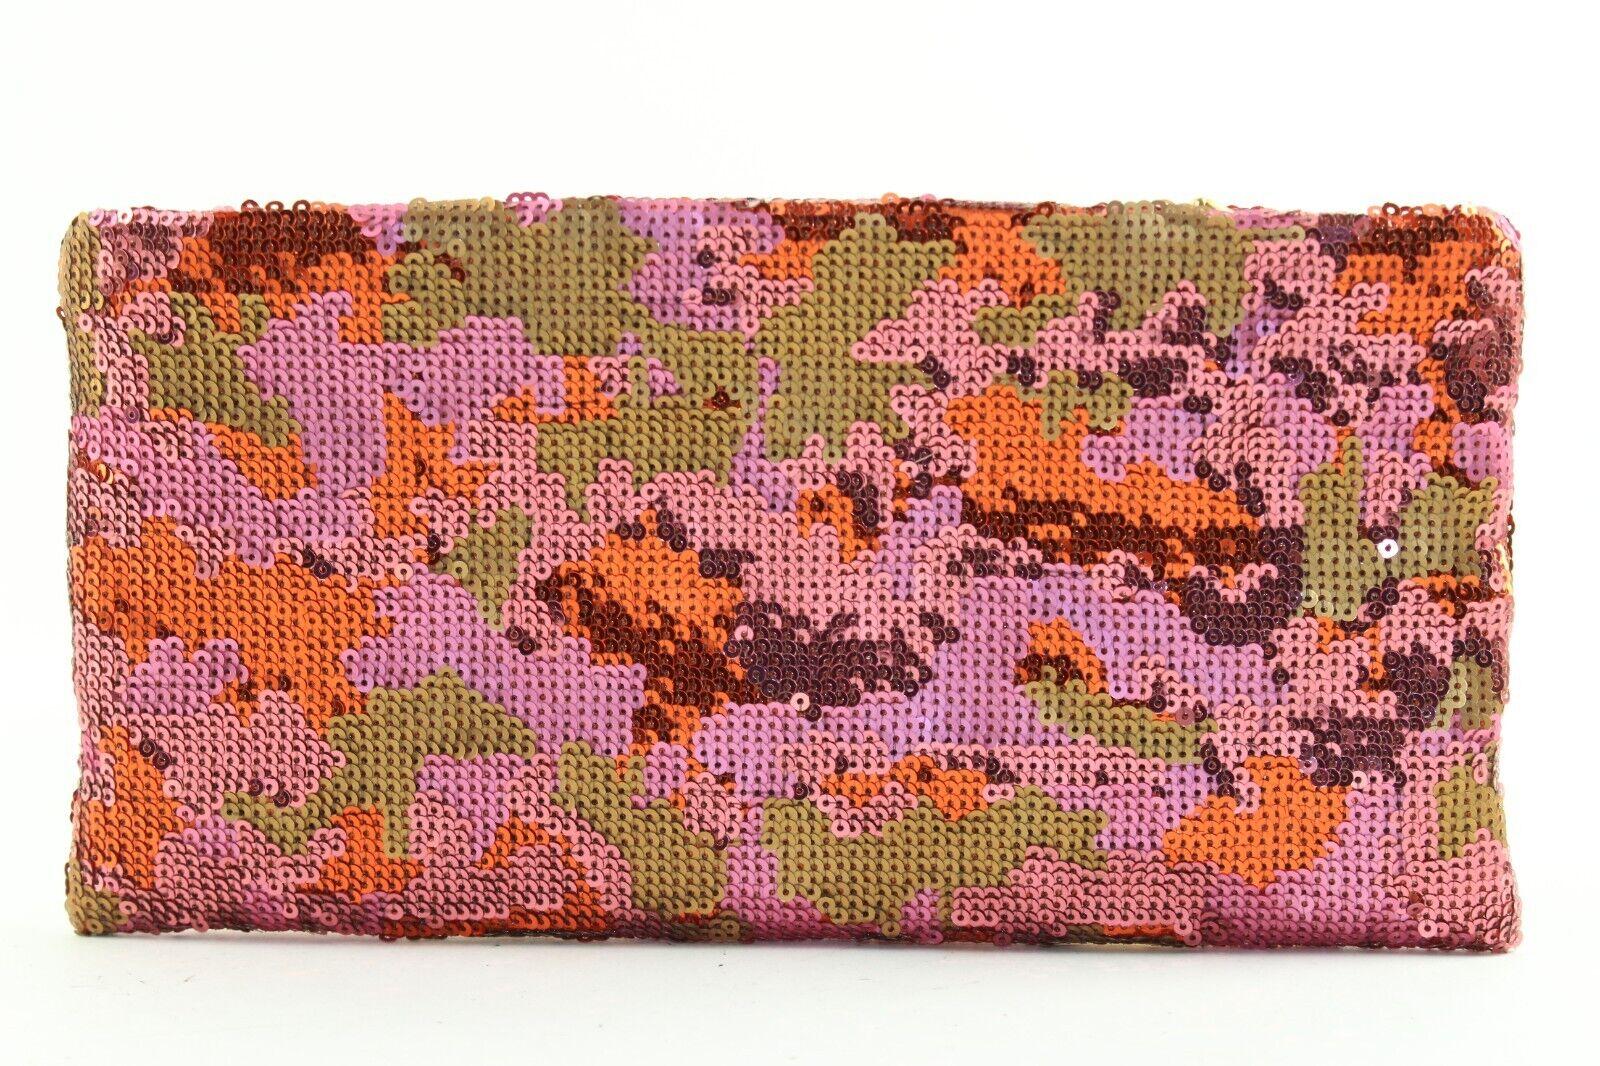 PRADA Sequin Multicolor Pink Clutch 2PR1214K In Excellent Condition For Sale In Dix hills, NY